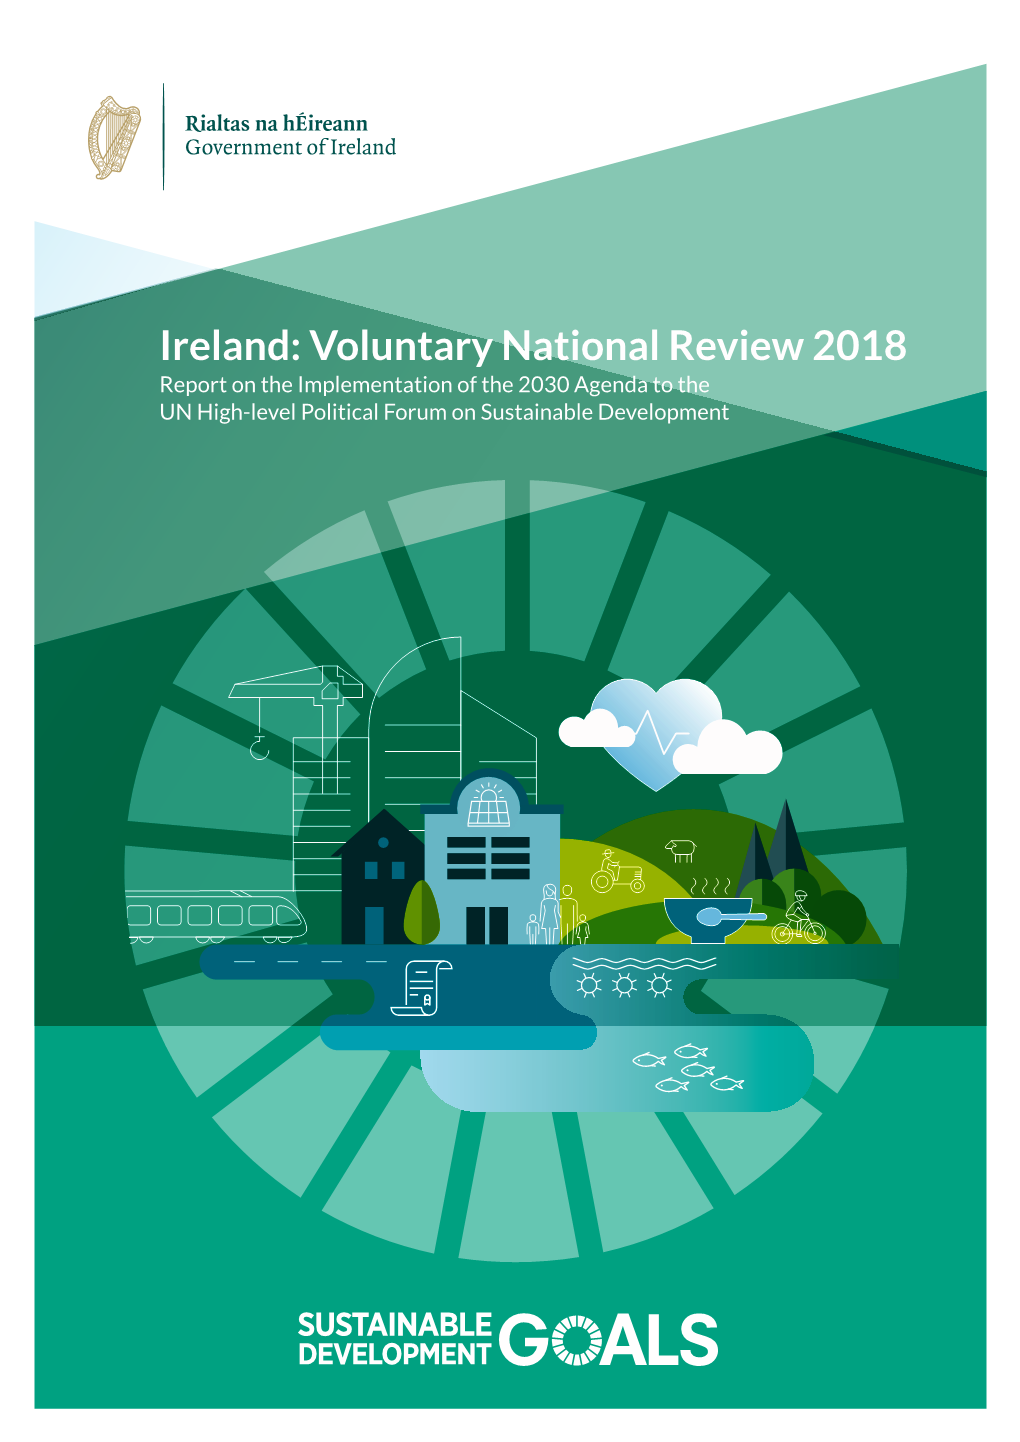 Ireland: Voluntary National Review 2018 Report on the Implementation of the 2030 Agenda to the UN High-Level Political Forum on Sustainable Development